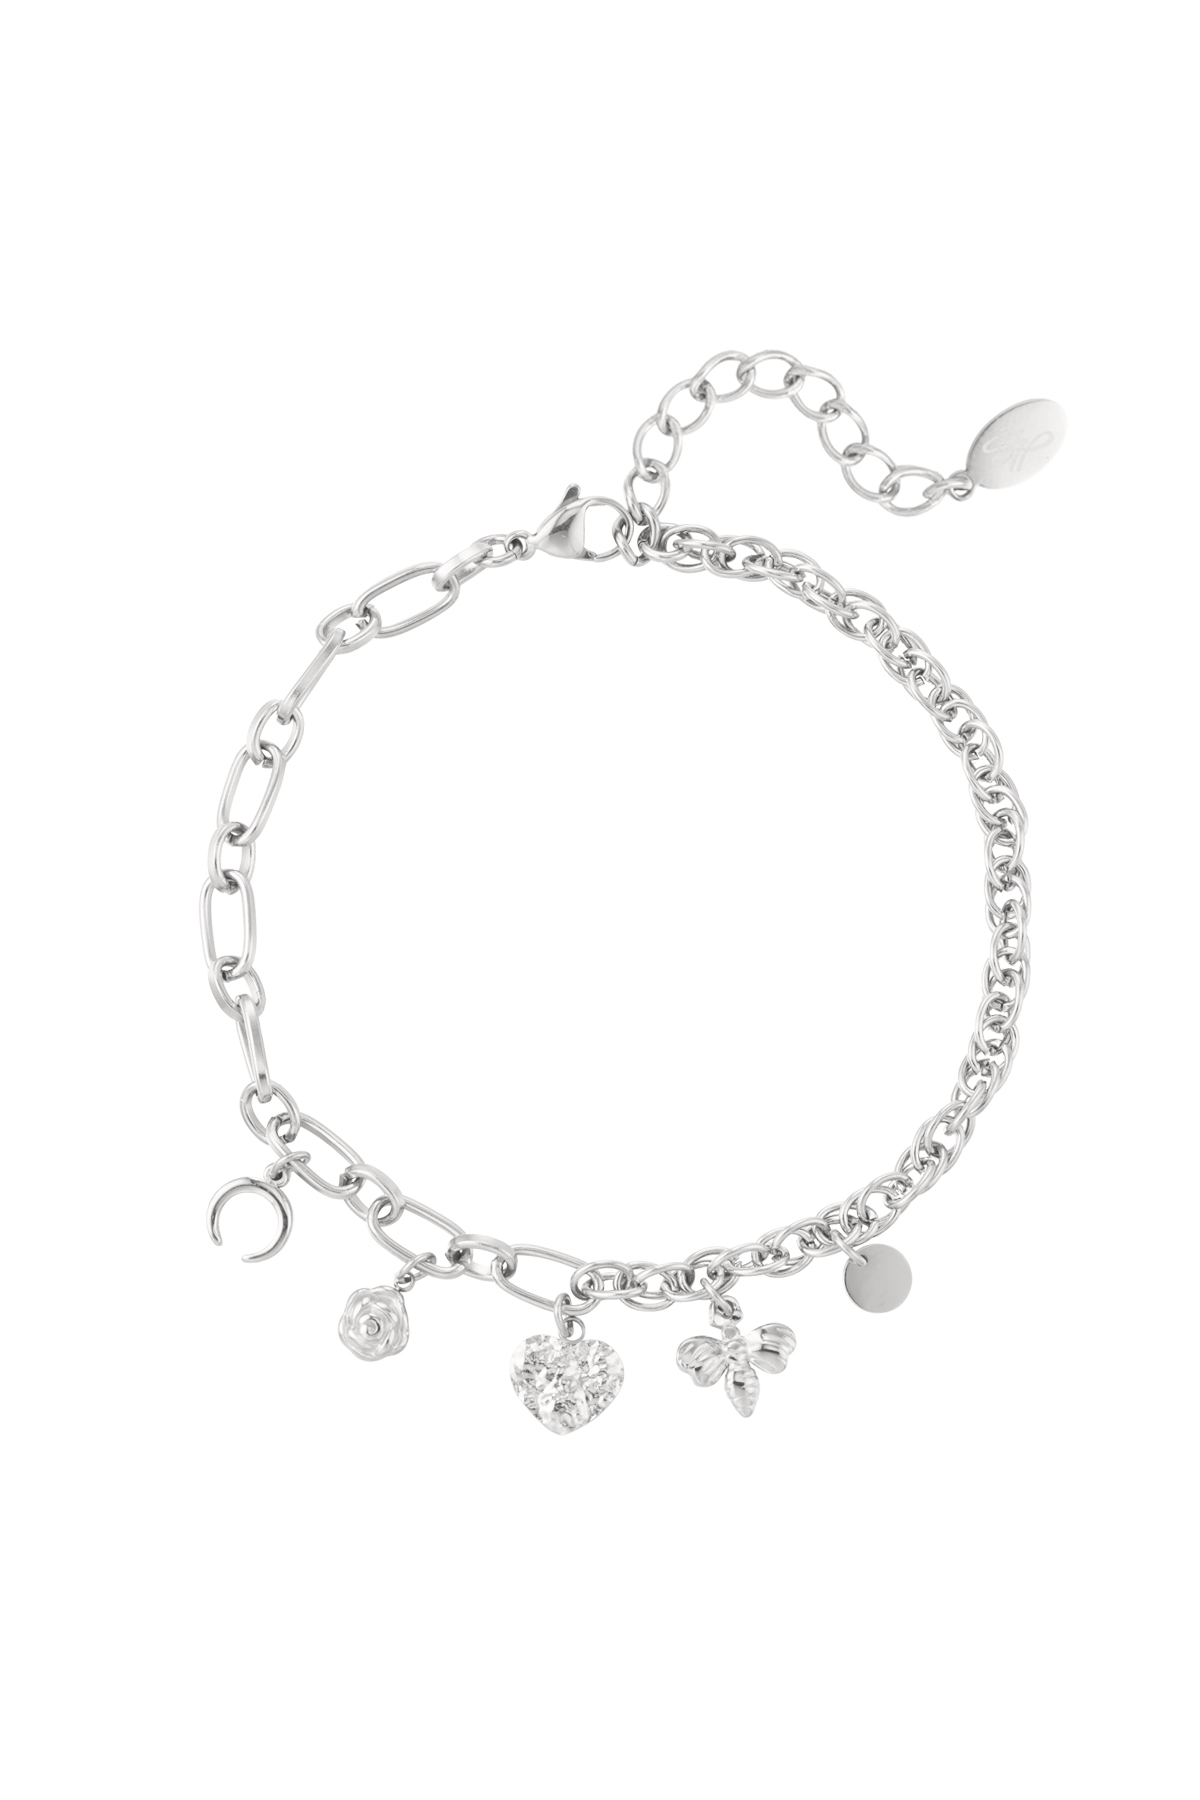 Bracelet different links with charms - silver